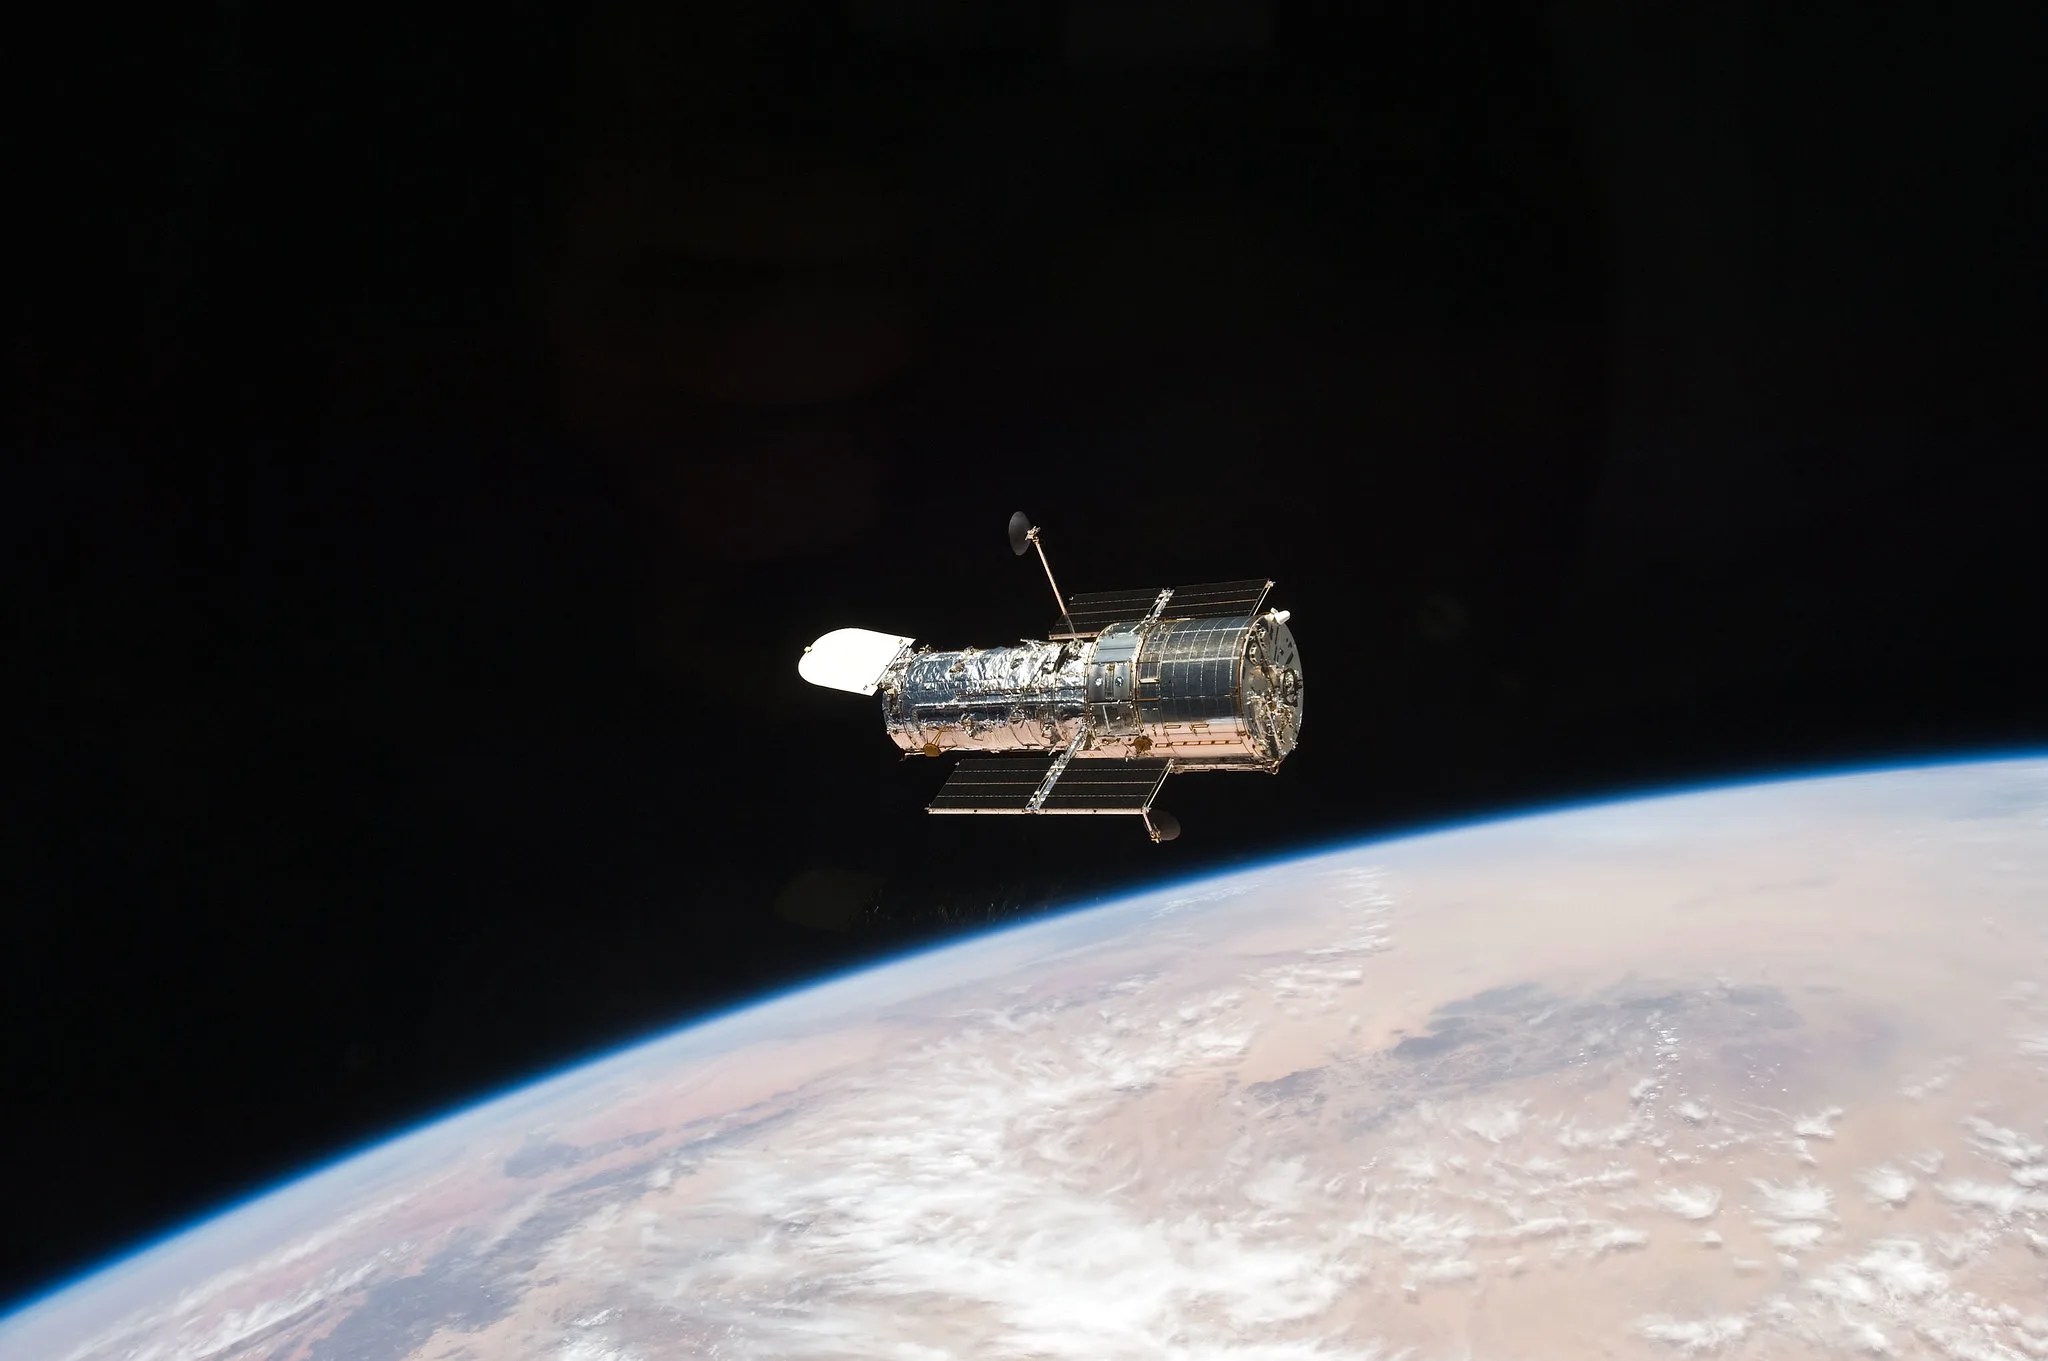 The Hubble Space Telescope as viewed from the Space Shuttle, orbiting Earth. Hubble is against a black background. The bottom half and lower right side of the image is a portion of Earth's sphere.